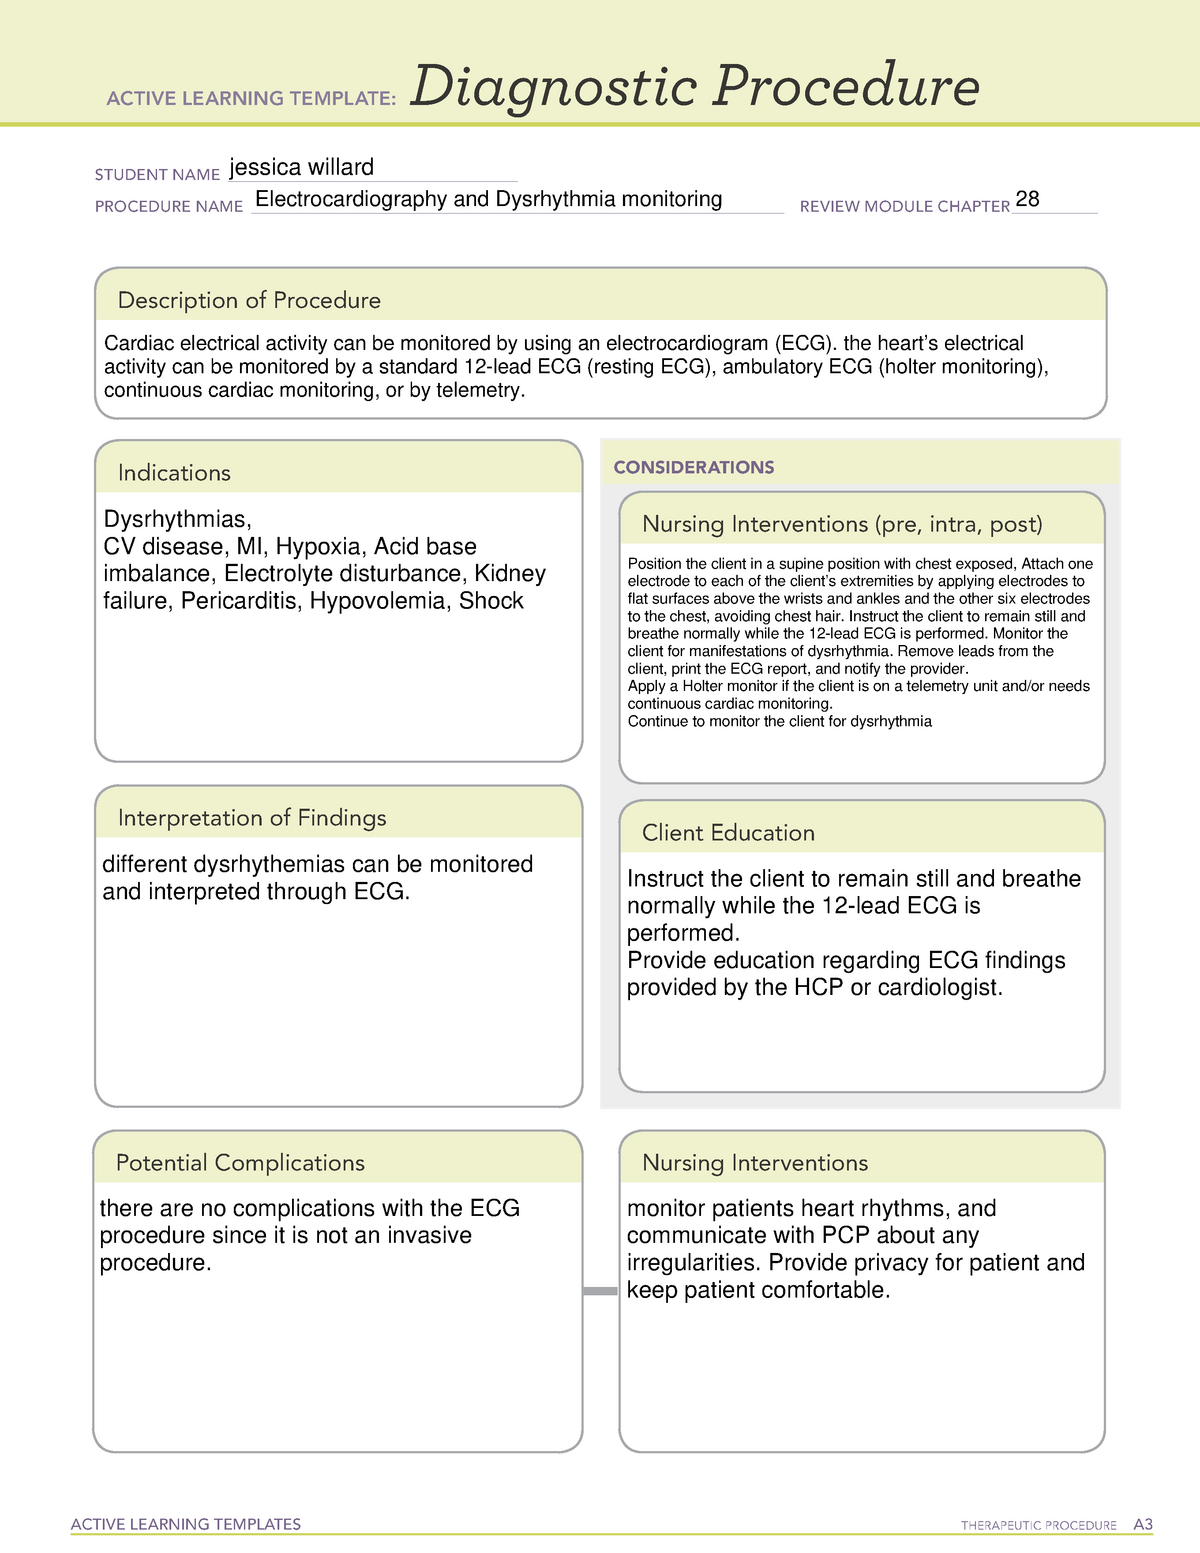 ECG ati learning templete ACTIVE LEARNING TEMPLATES THERAPEUTIC